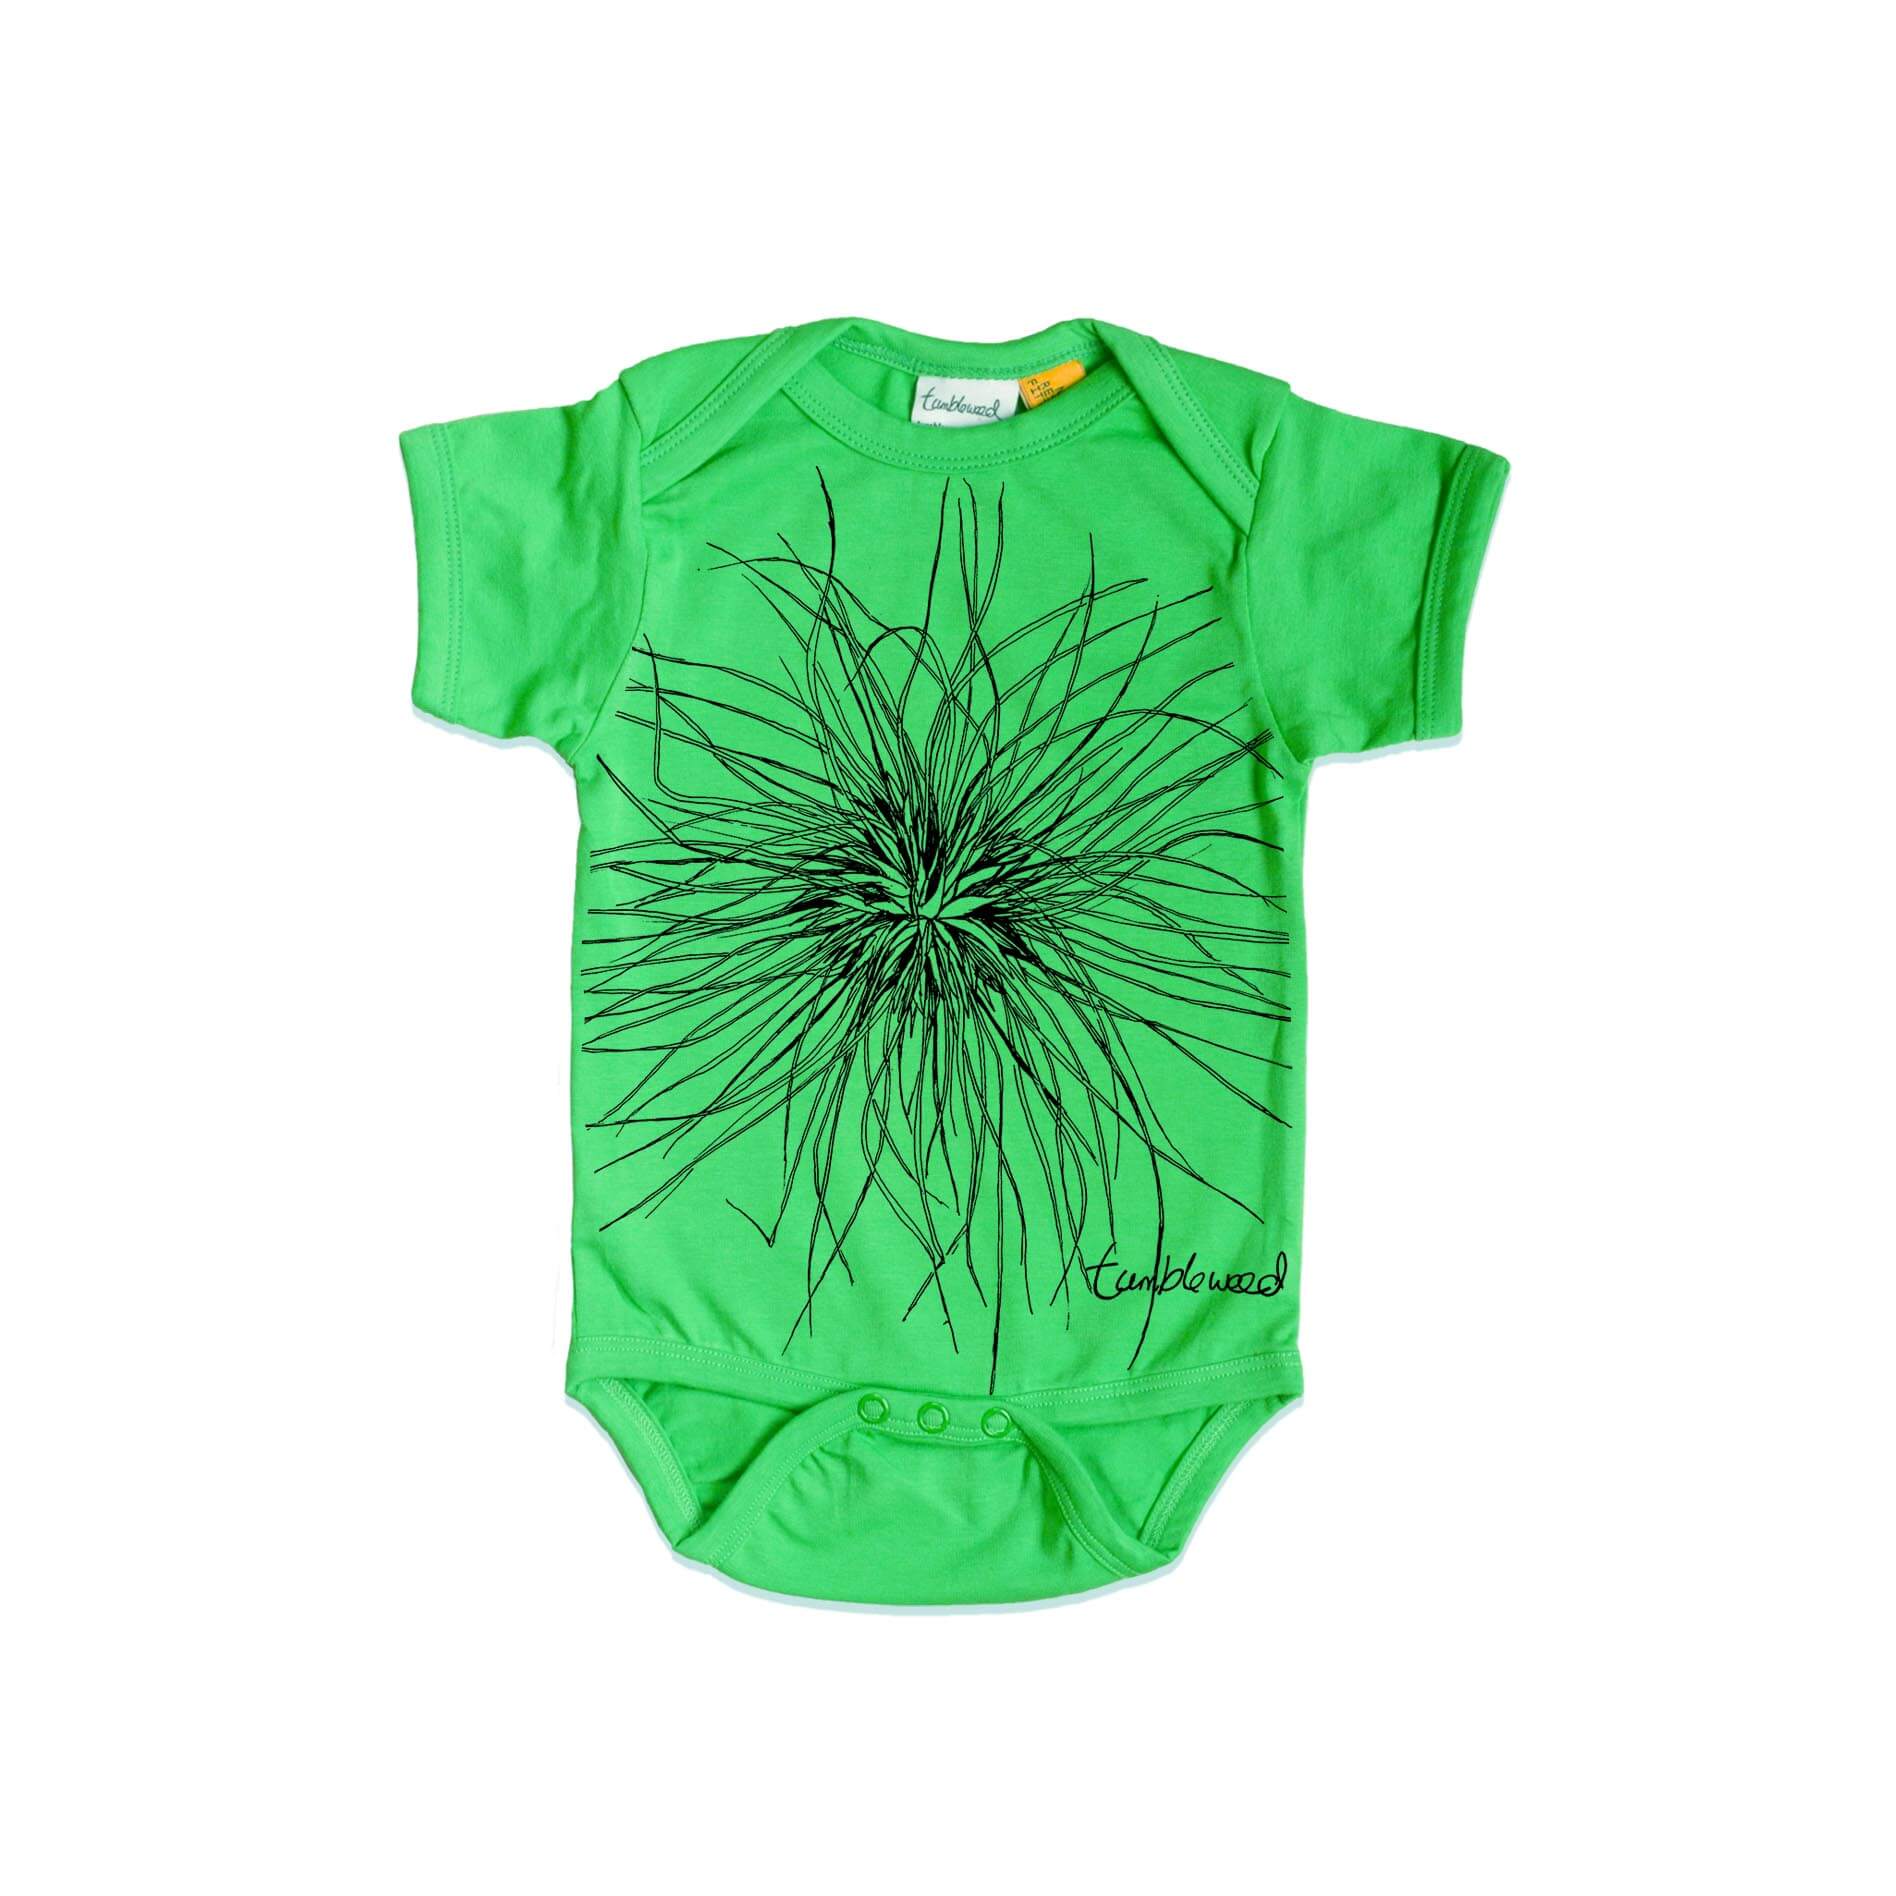 Short sleeved, green, organic cotton, baby onesie featuring a screen printed Tumbleweed/Spinifex design.
 design.